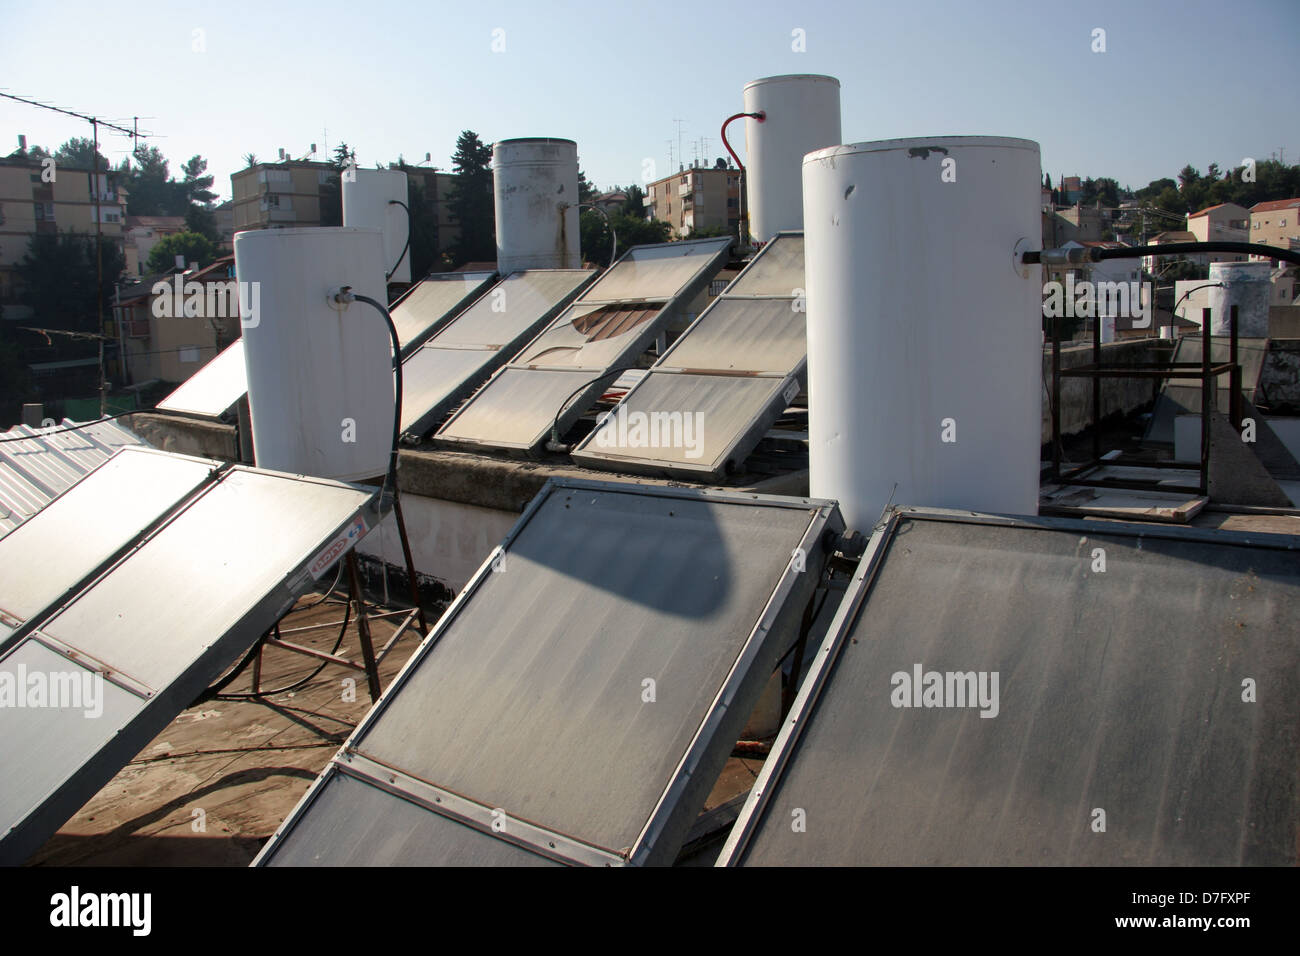 solar water heaters in safed Stock Photo